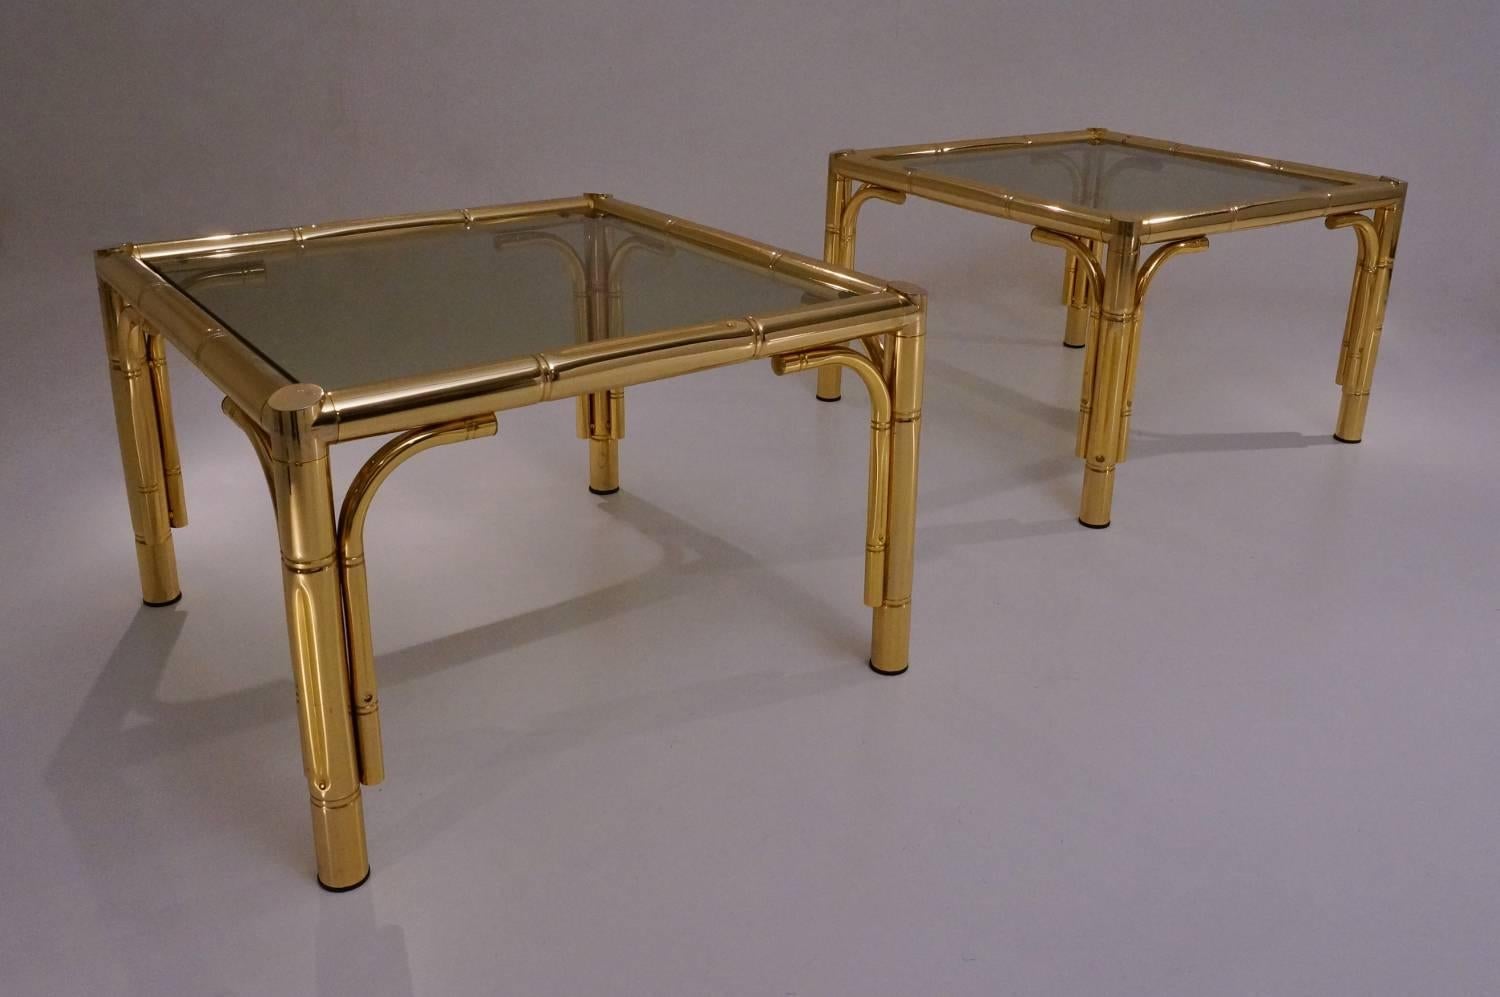 Maison Baguès tables (attributed) a pair in brass bamboo effect frames with glass tops, 1970s, circa France.

These tables have been thoroughly cleaned respecting the original aged patina and are ready to use.

This Modernist pair of vintage